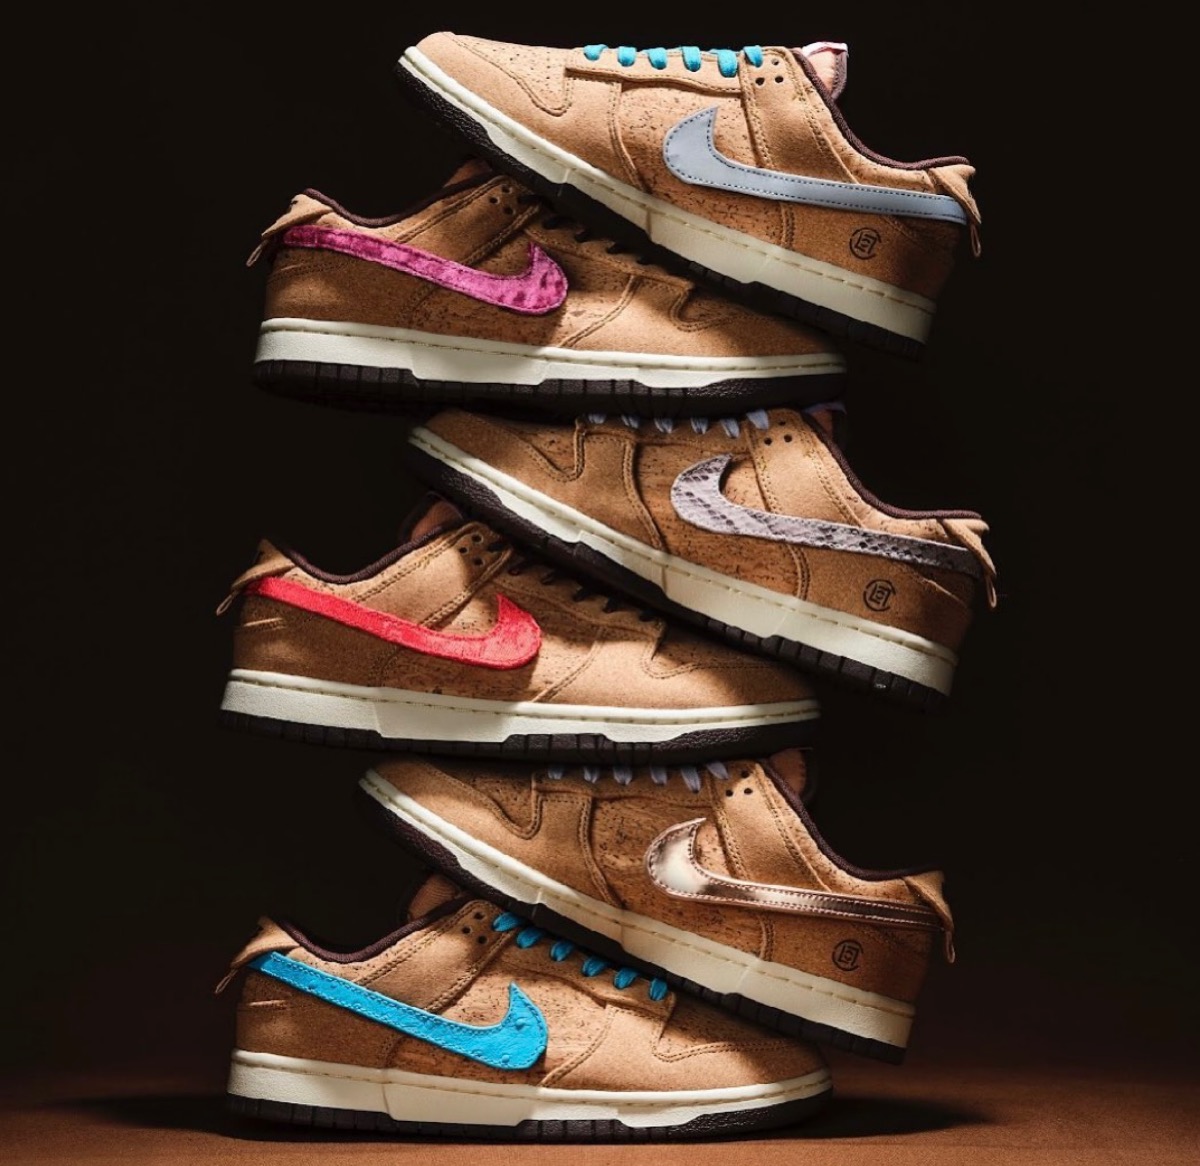 CLOT × Nike Dunk Low SP “Cork”が国内6月30日より発売［FN0317-121 ...